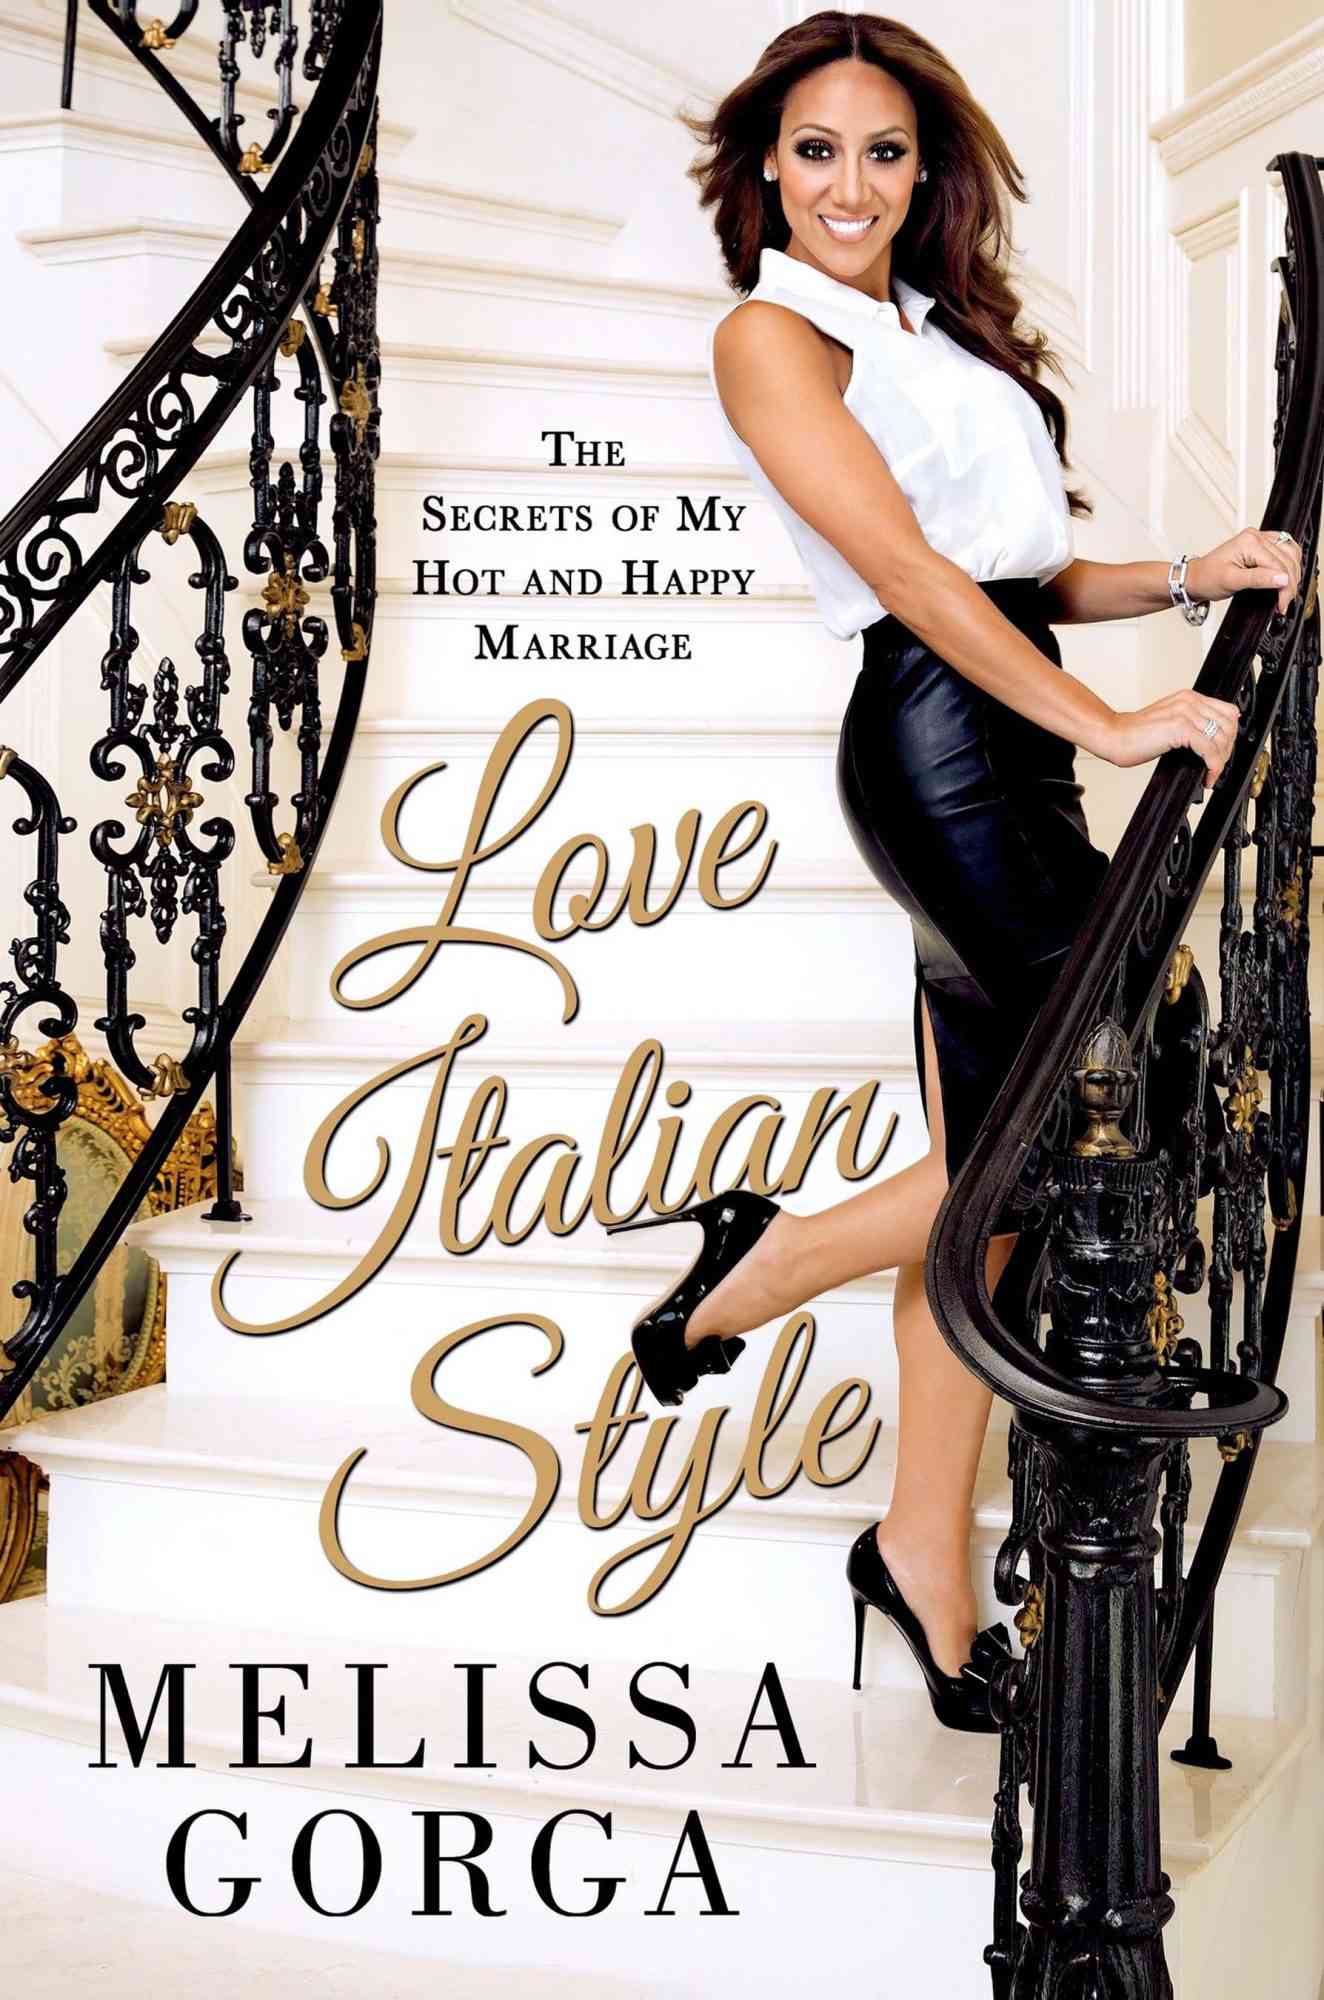 Love Italian Style: The Secrets of My Hot and Happy Marriage, by Melissa Gorga